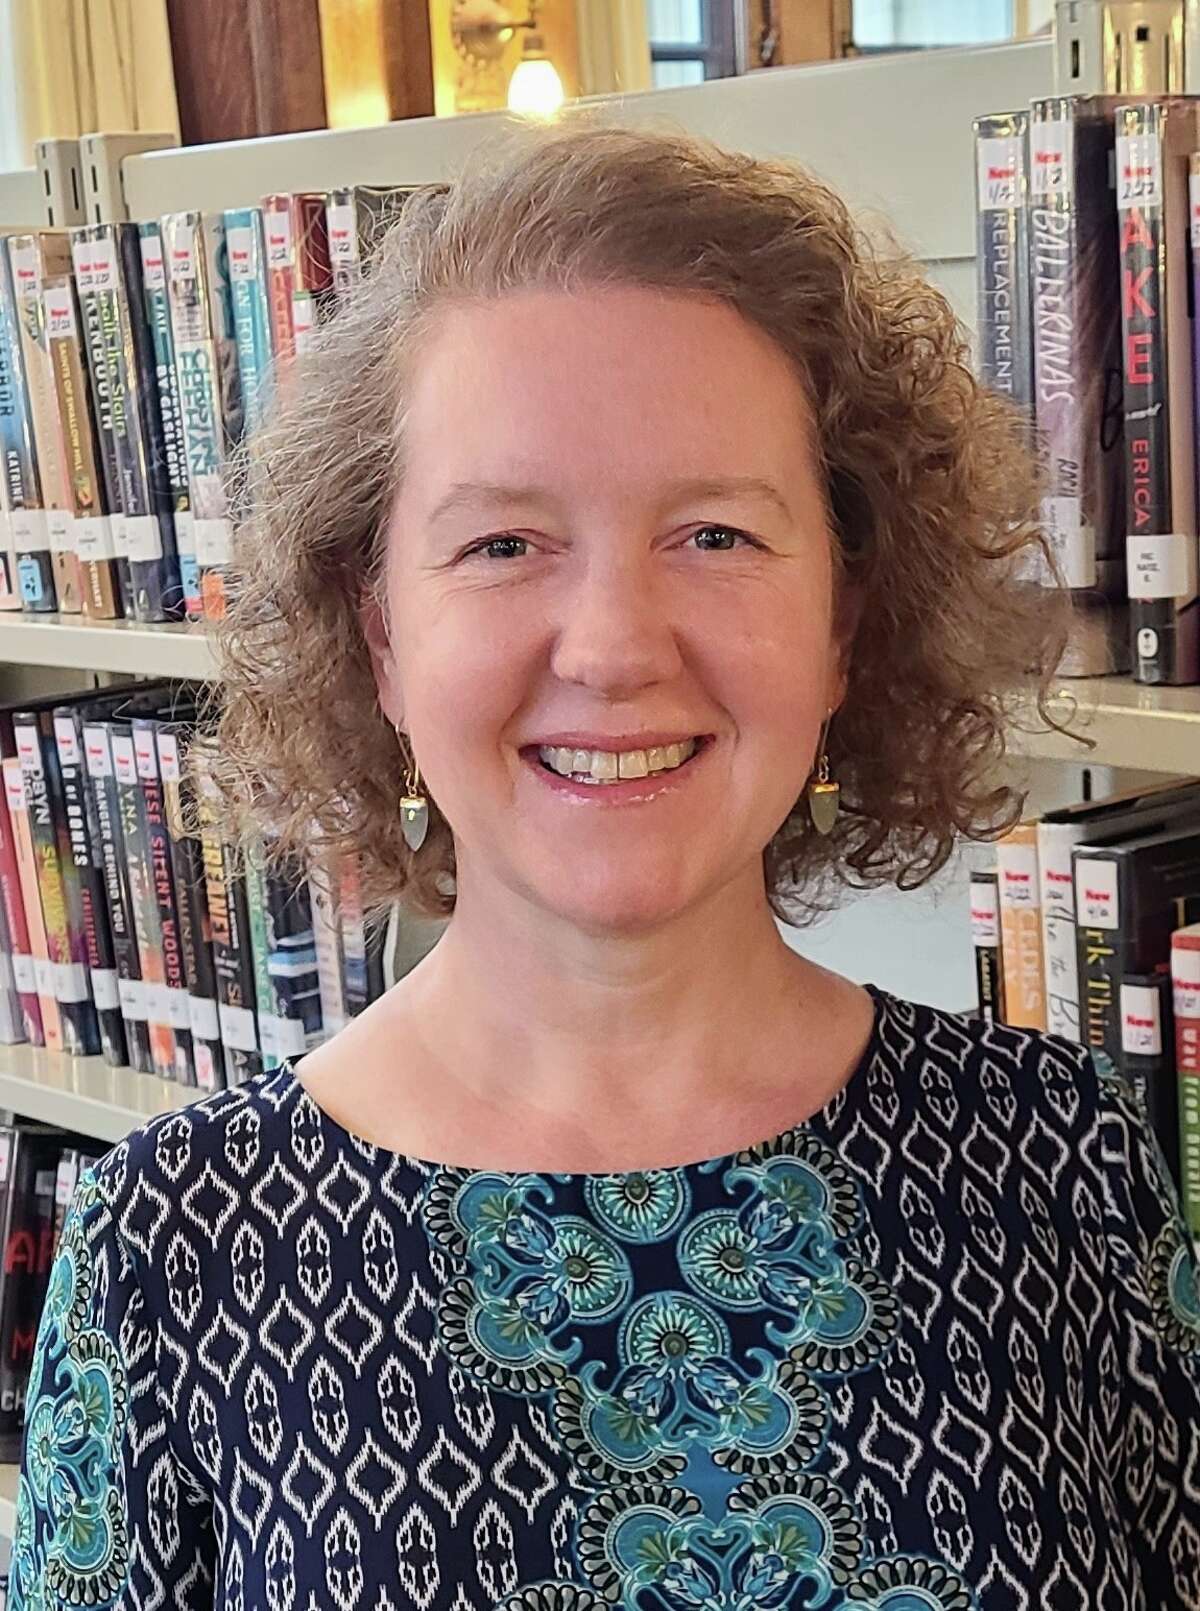 Andrea Nicolay starts Aug. 1 as executive director of the Albany Public Library.